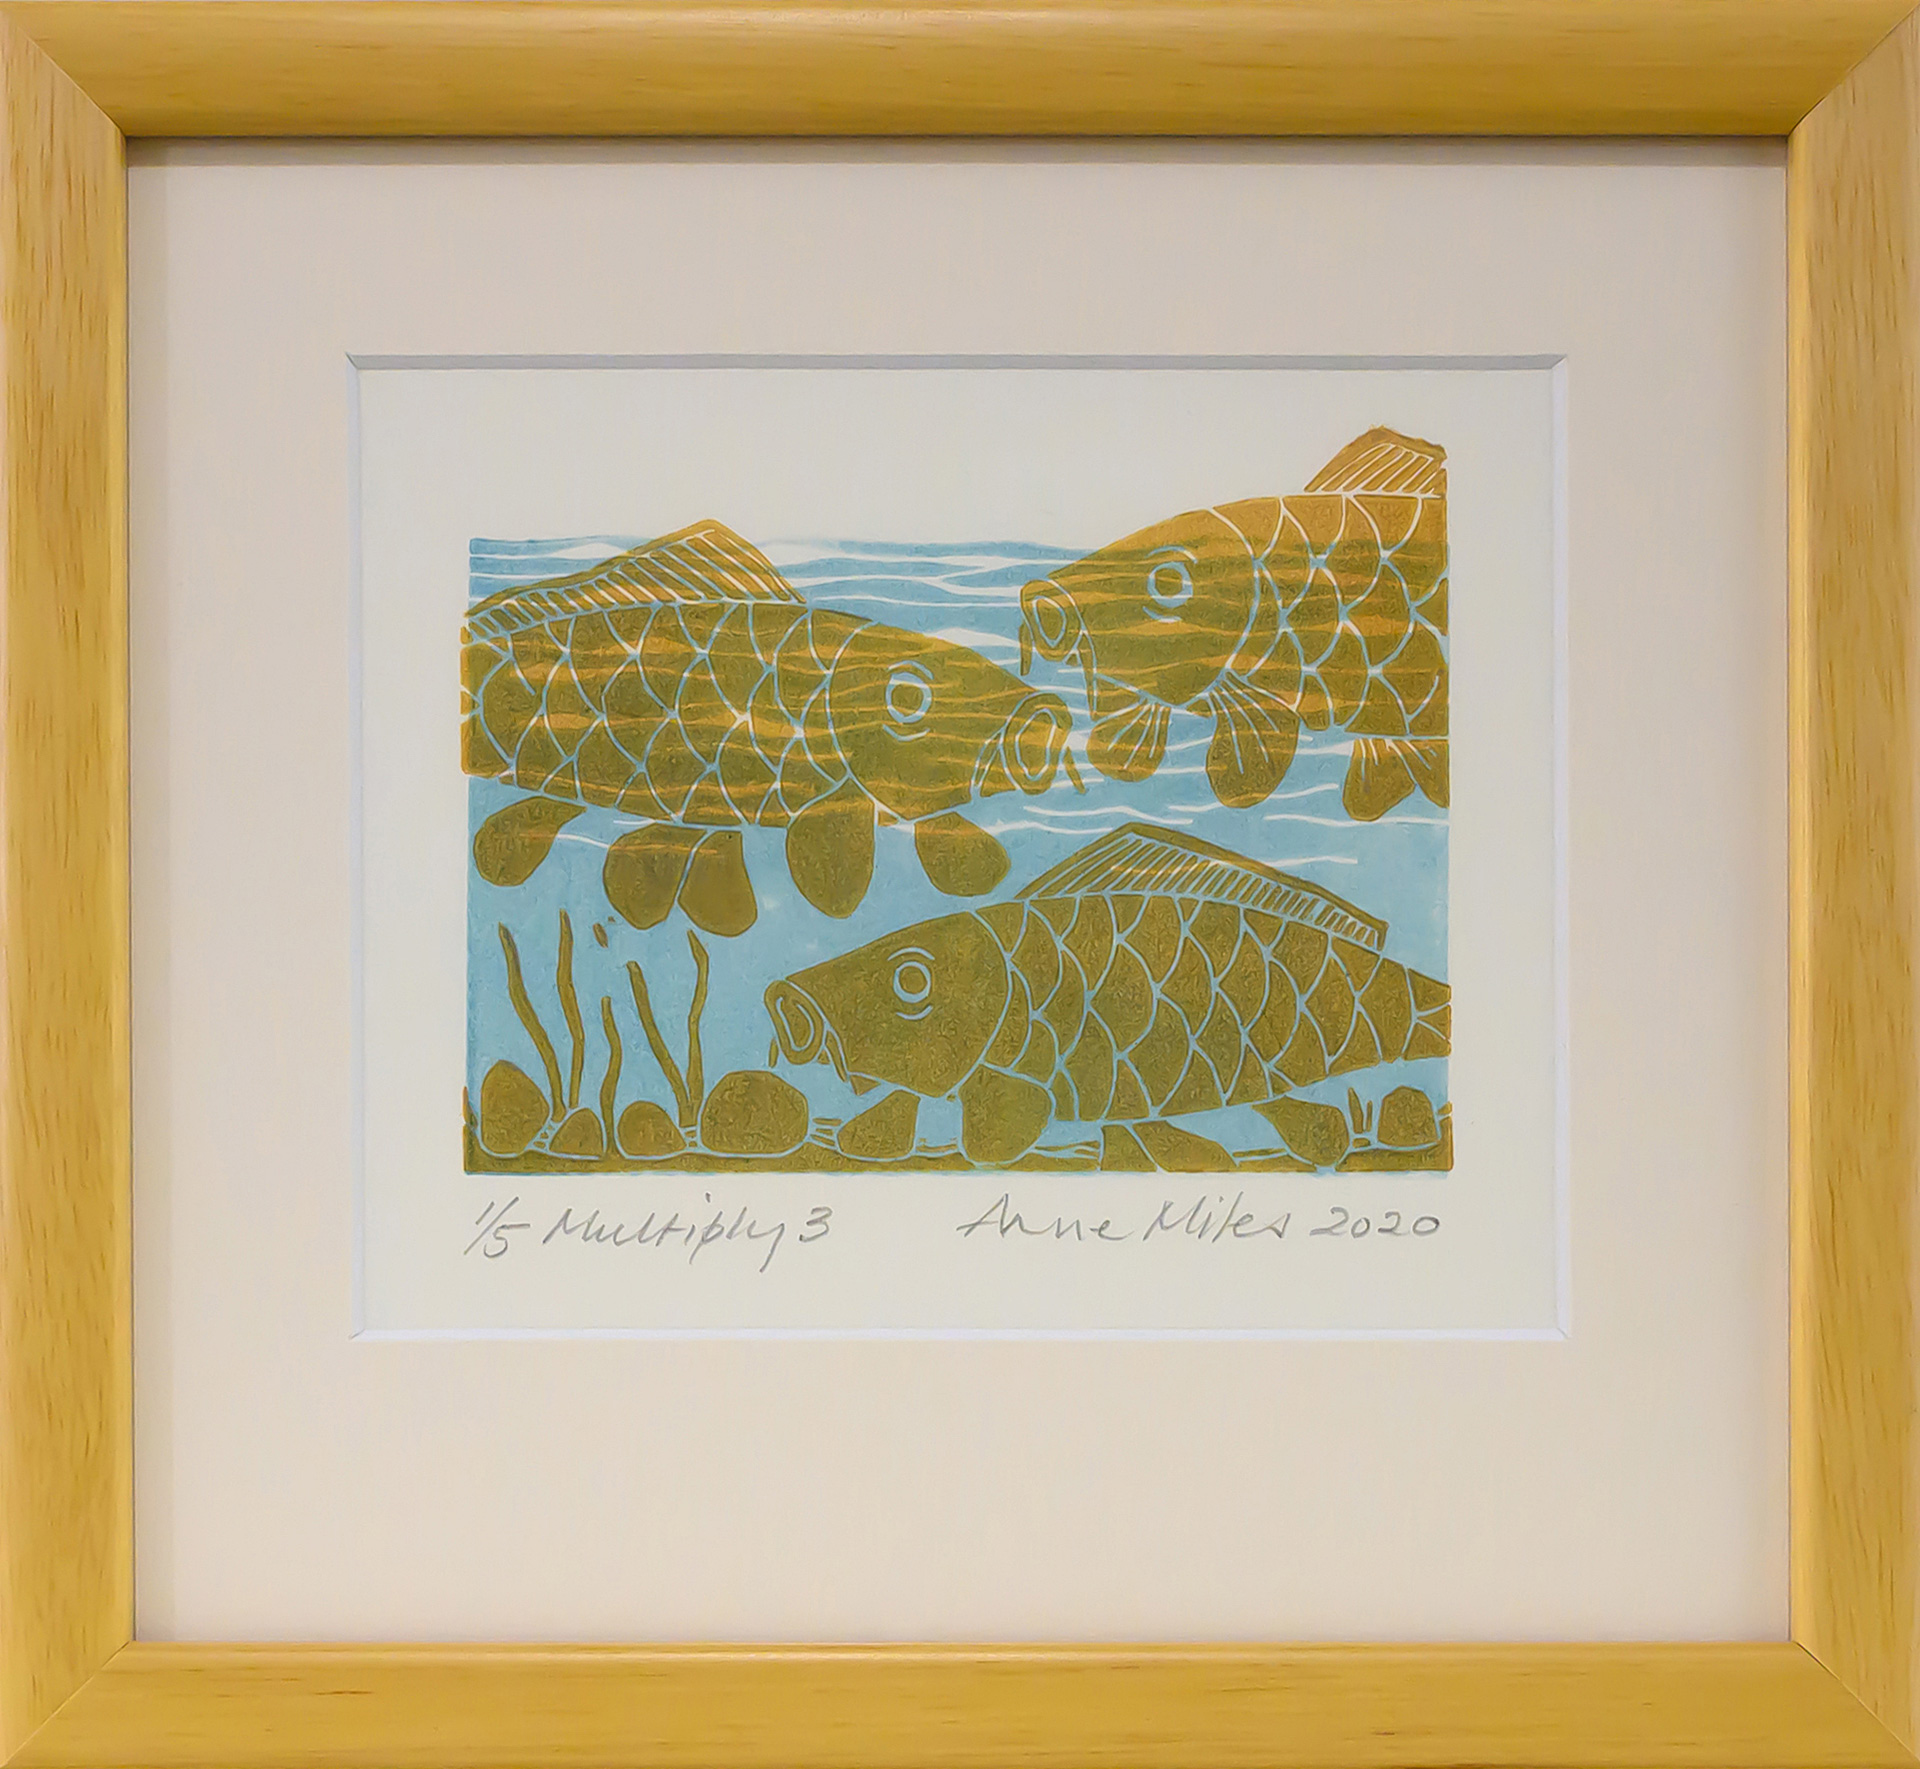 Framed artwork by Anne Miles of 3 yellow Carp with rocks and weeds in a blue water background